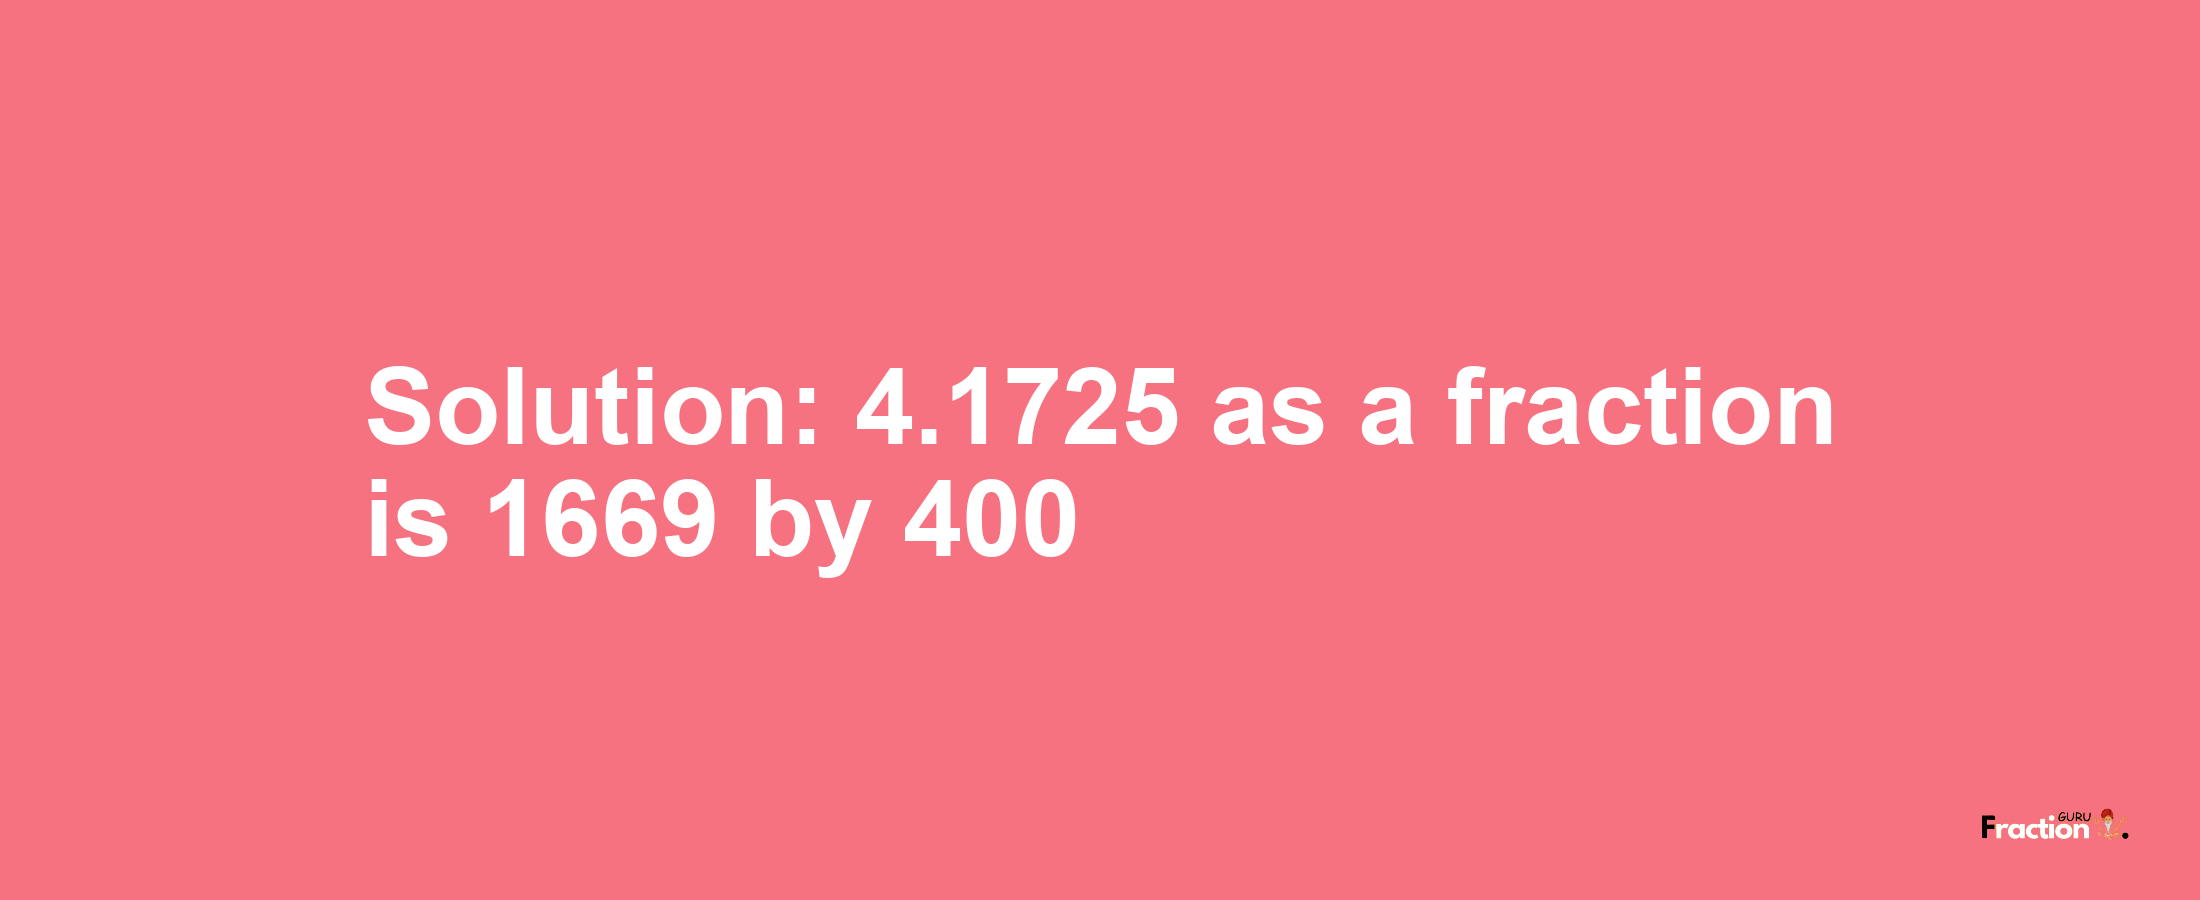 Solution:4.1725 as a fraction is 1669/400